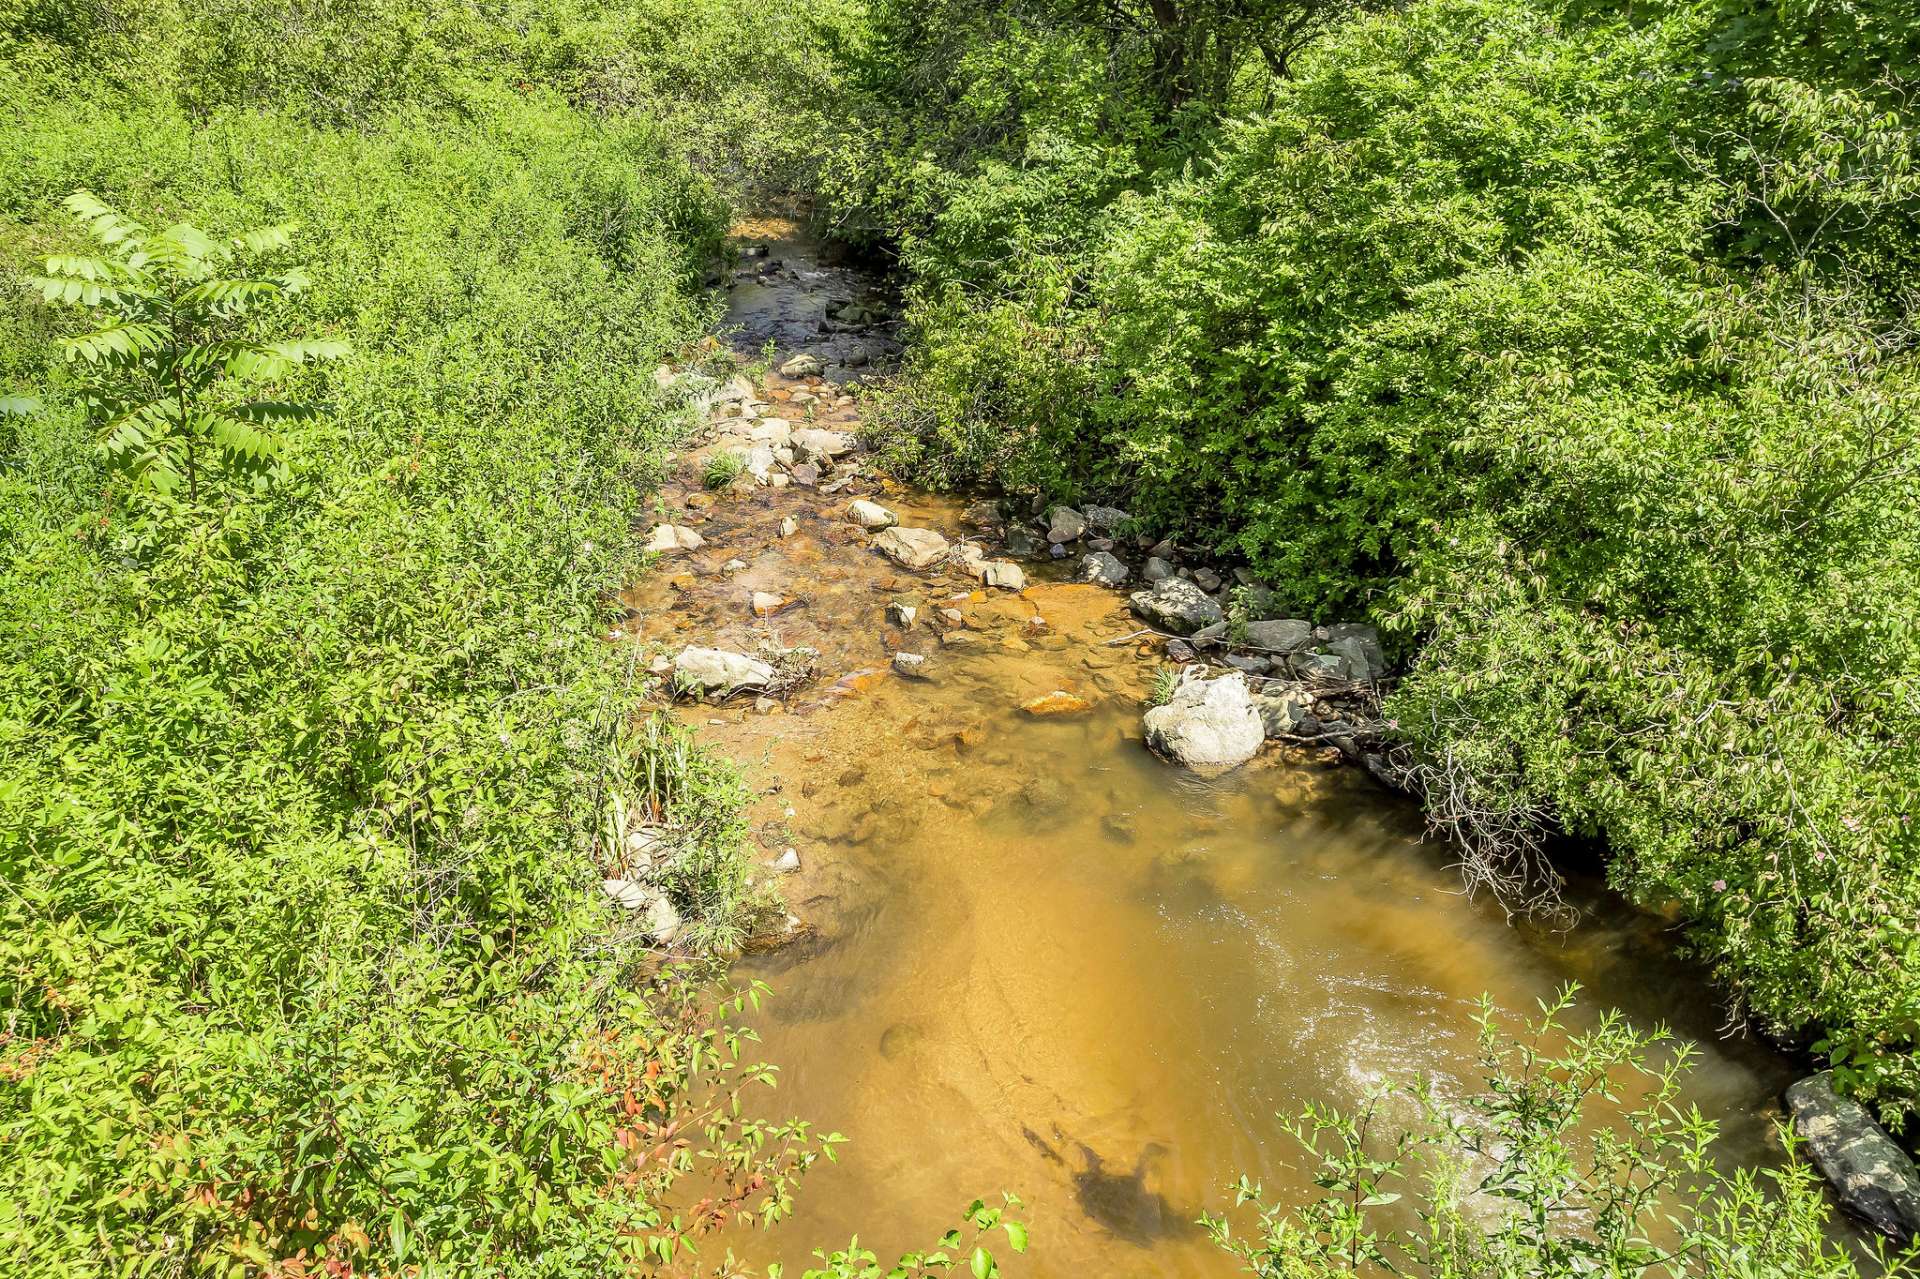 A winding mountain stream, Peach Bottom Creek, flows through the property after entering.